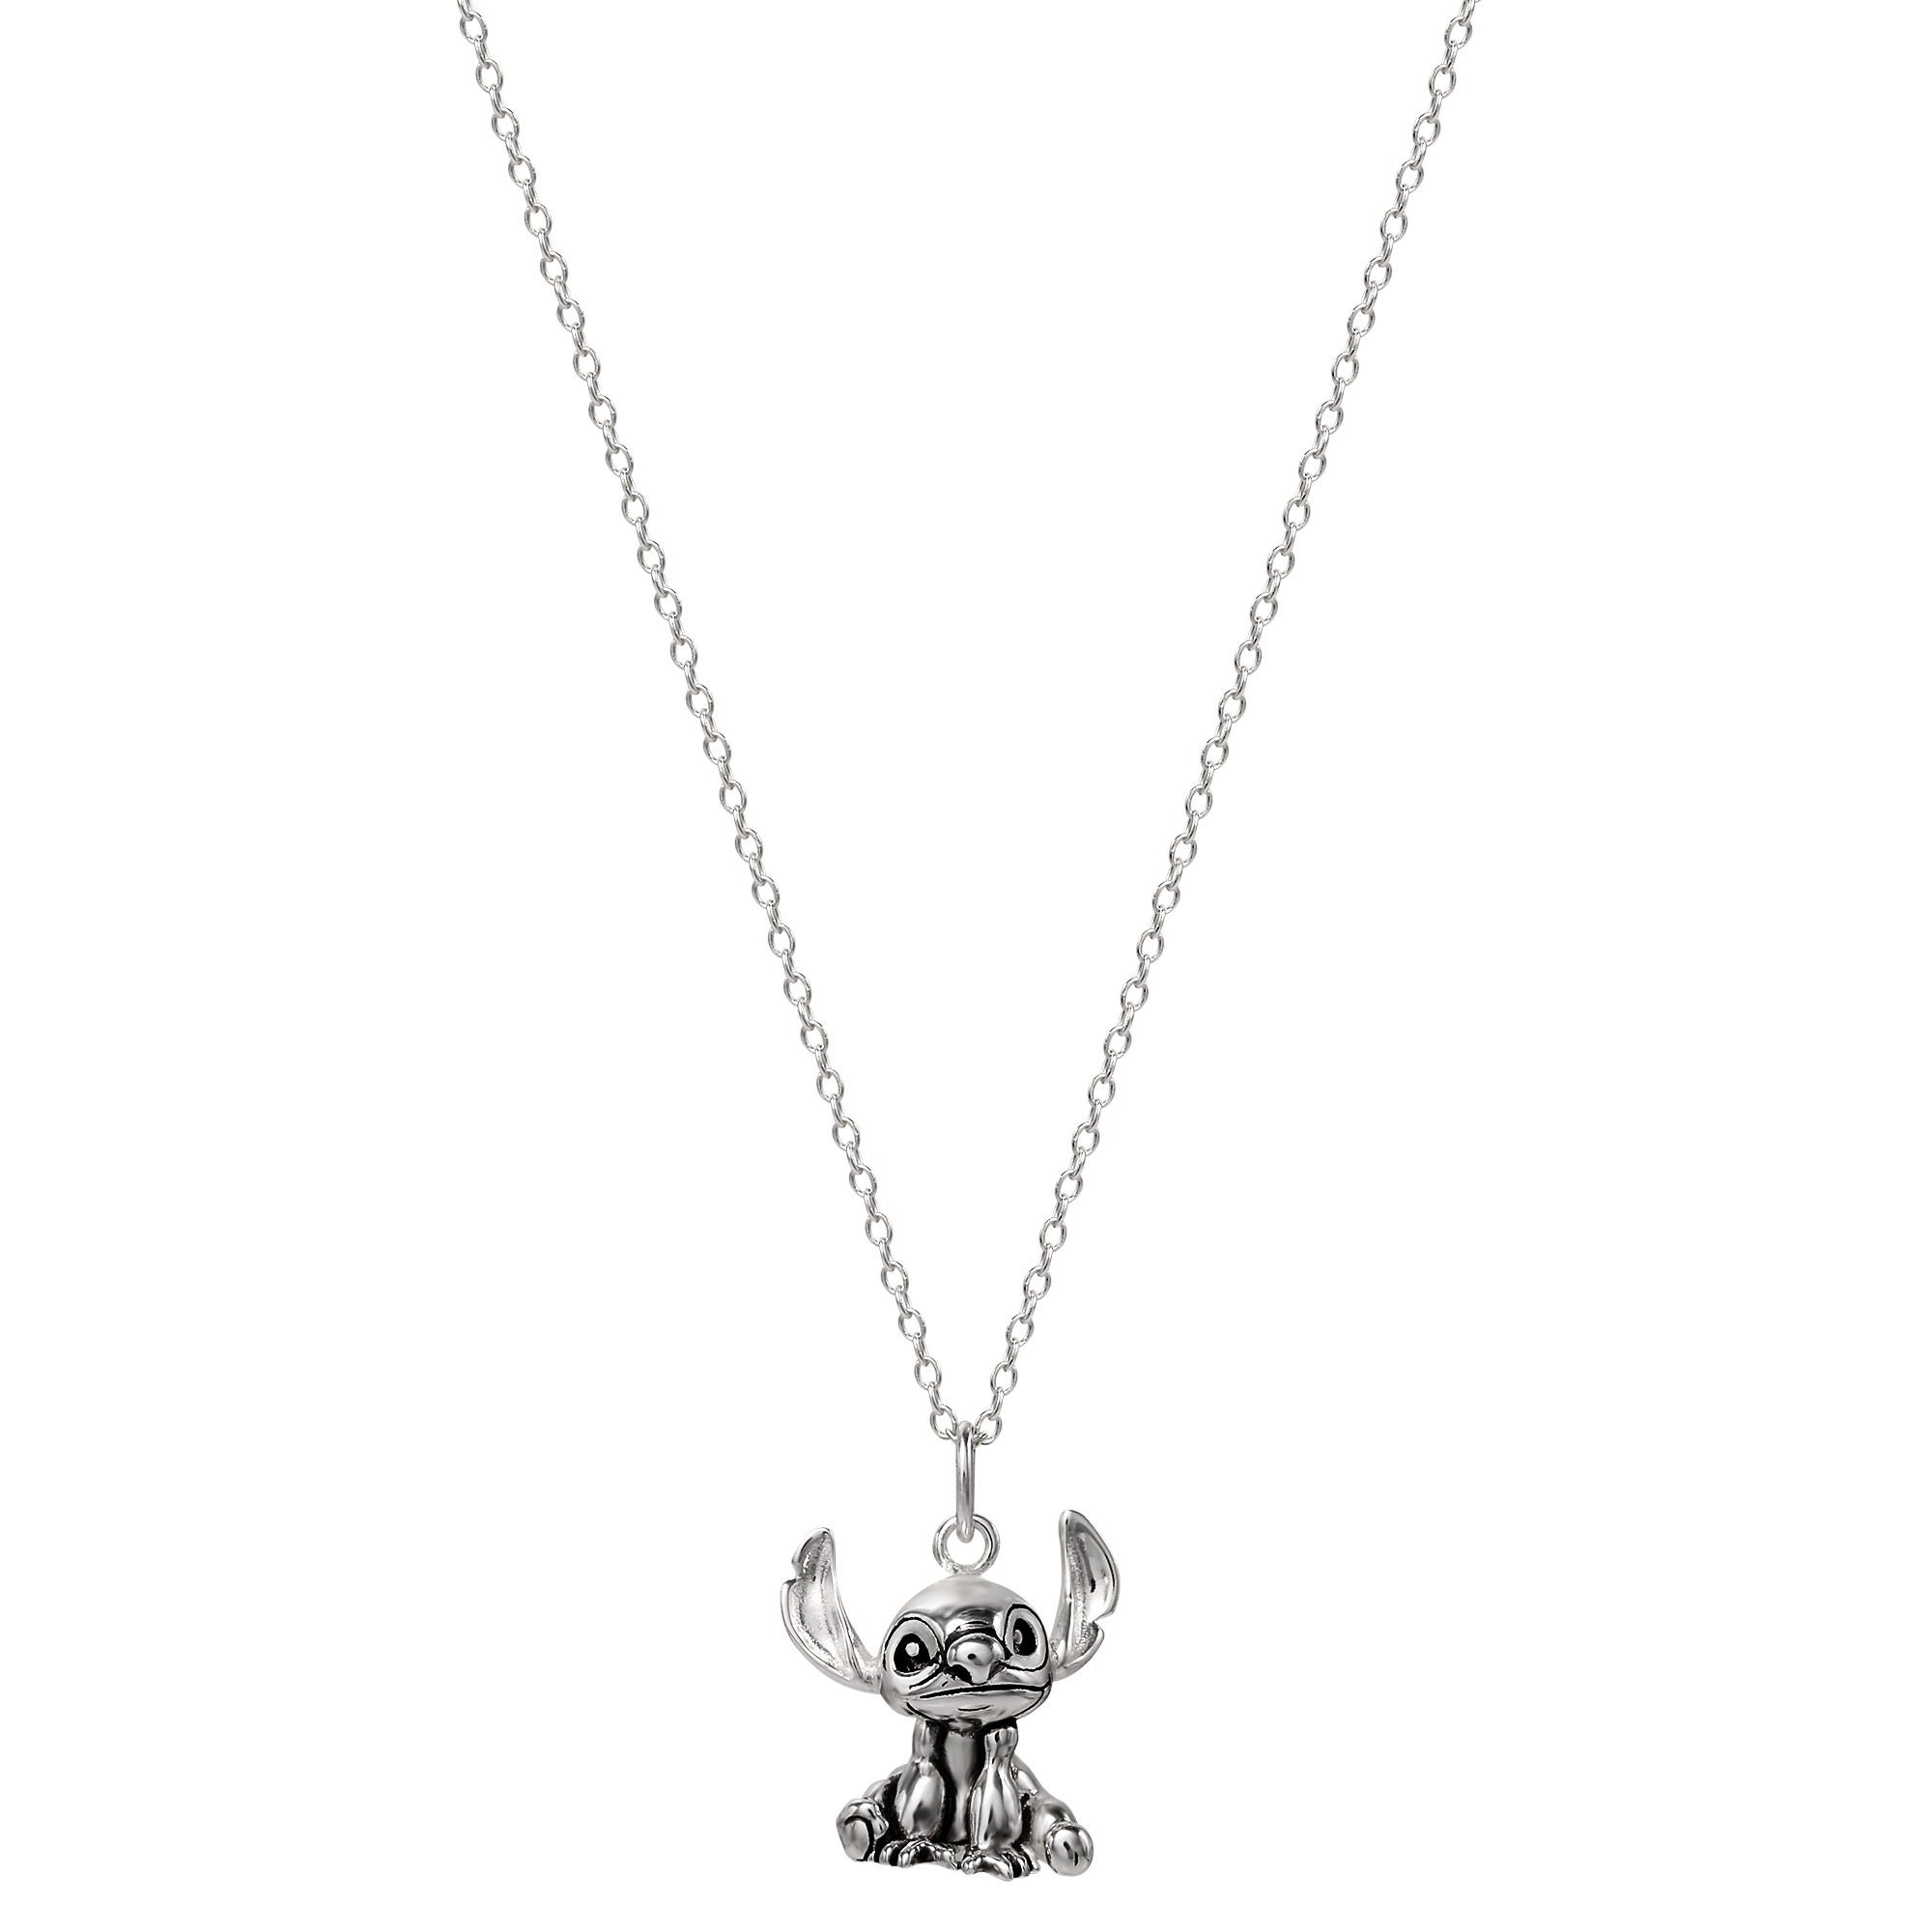 Disney Lilo and Stitch Women's Sterling Silver Stitch Pendant Necklace, 18" Chain - image 5 of 5